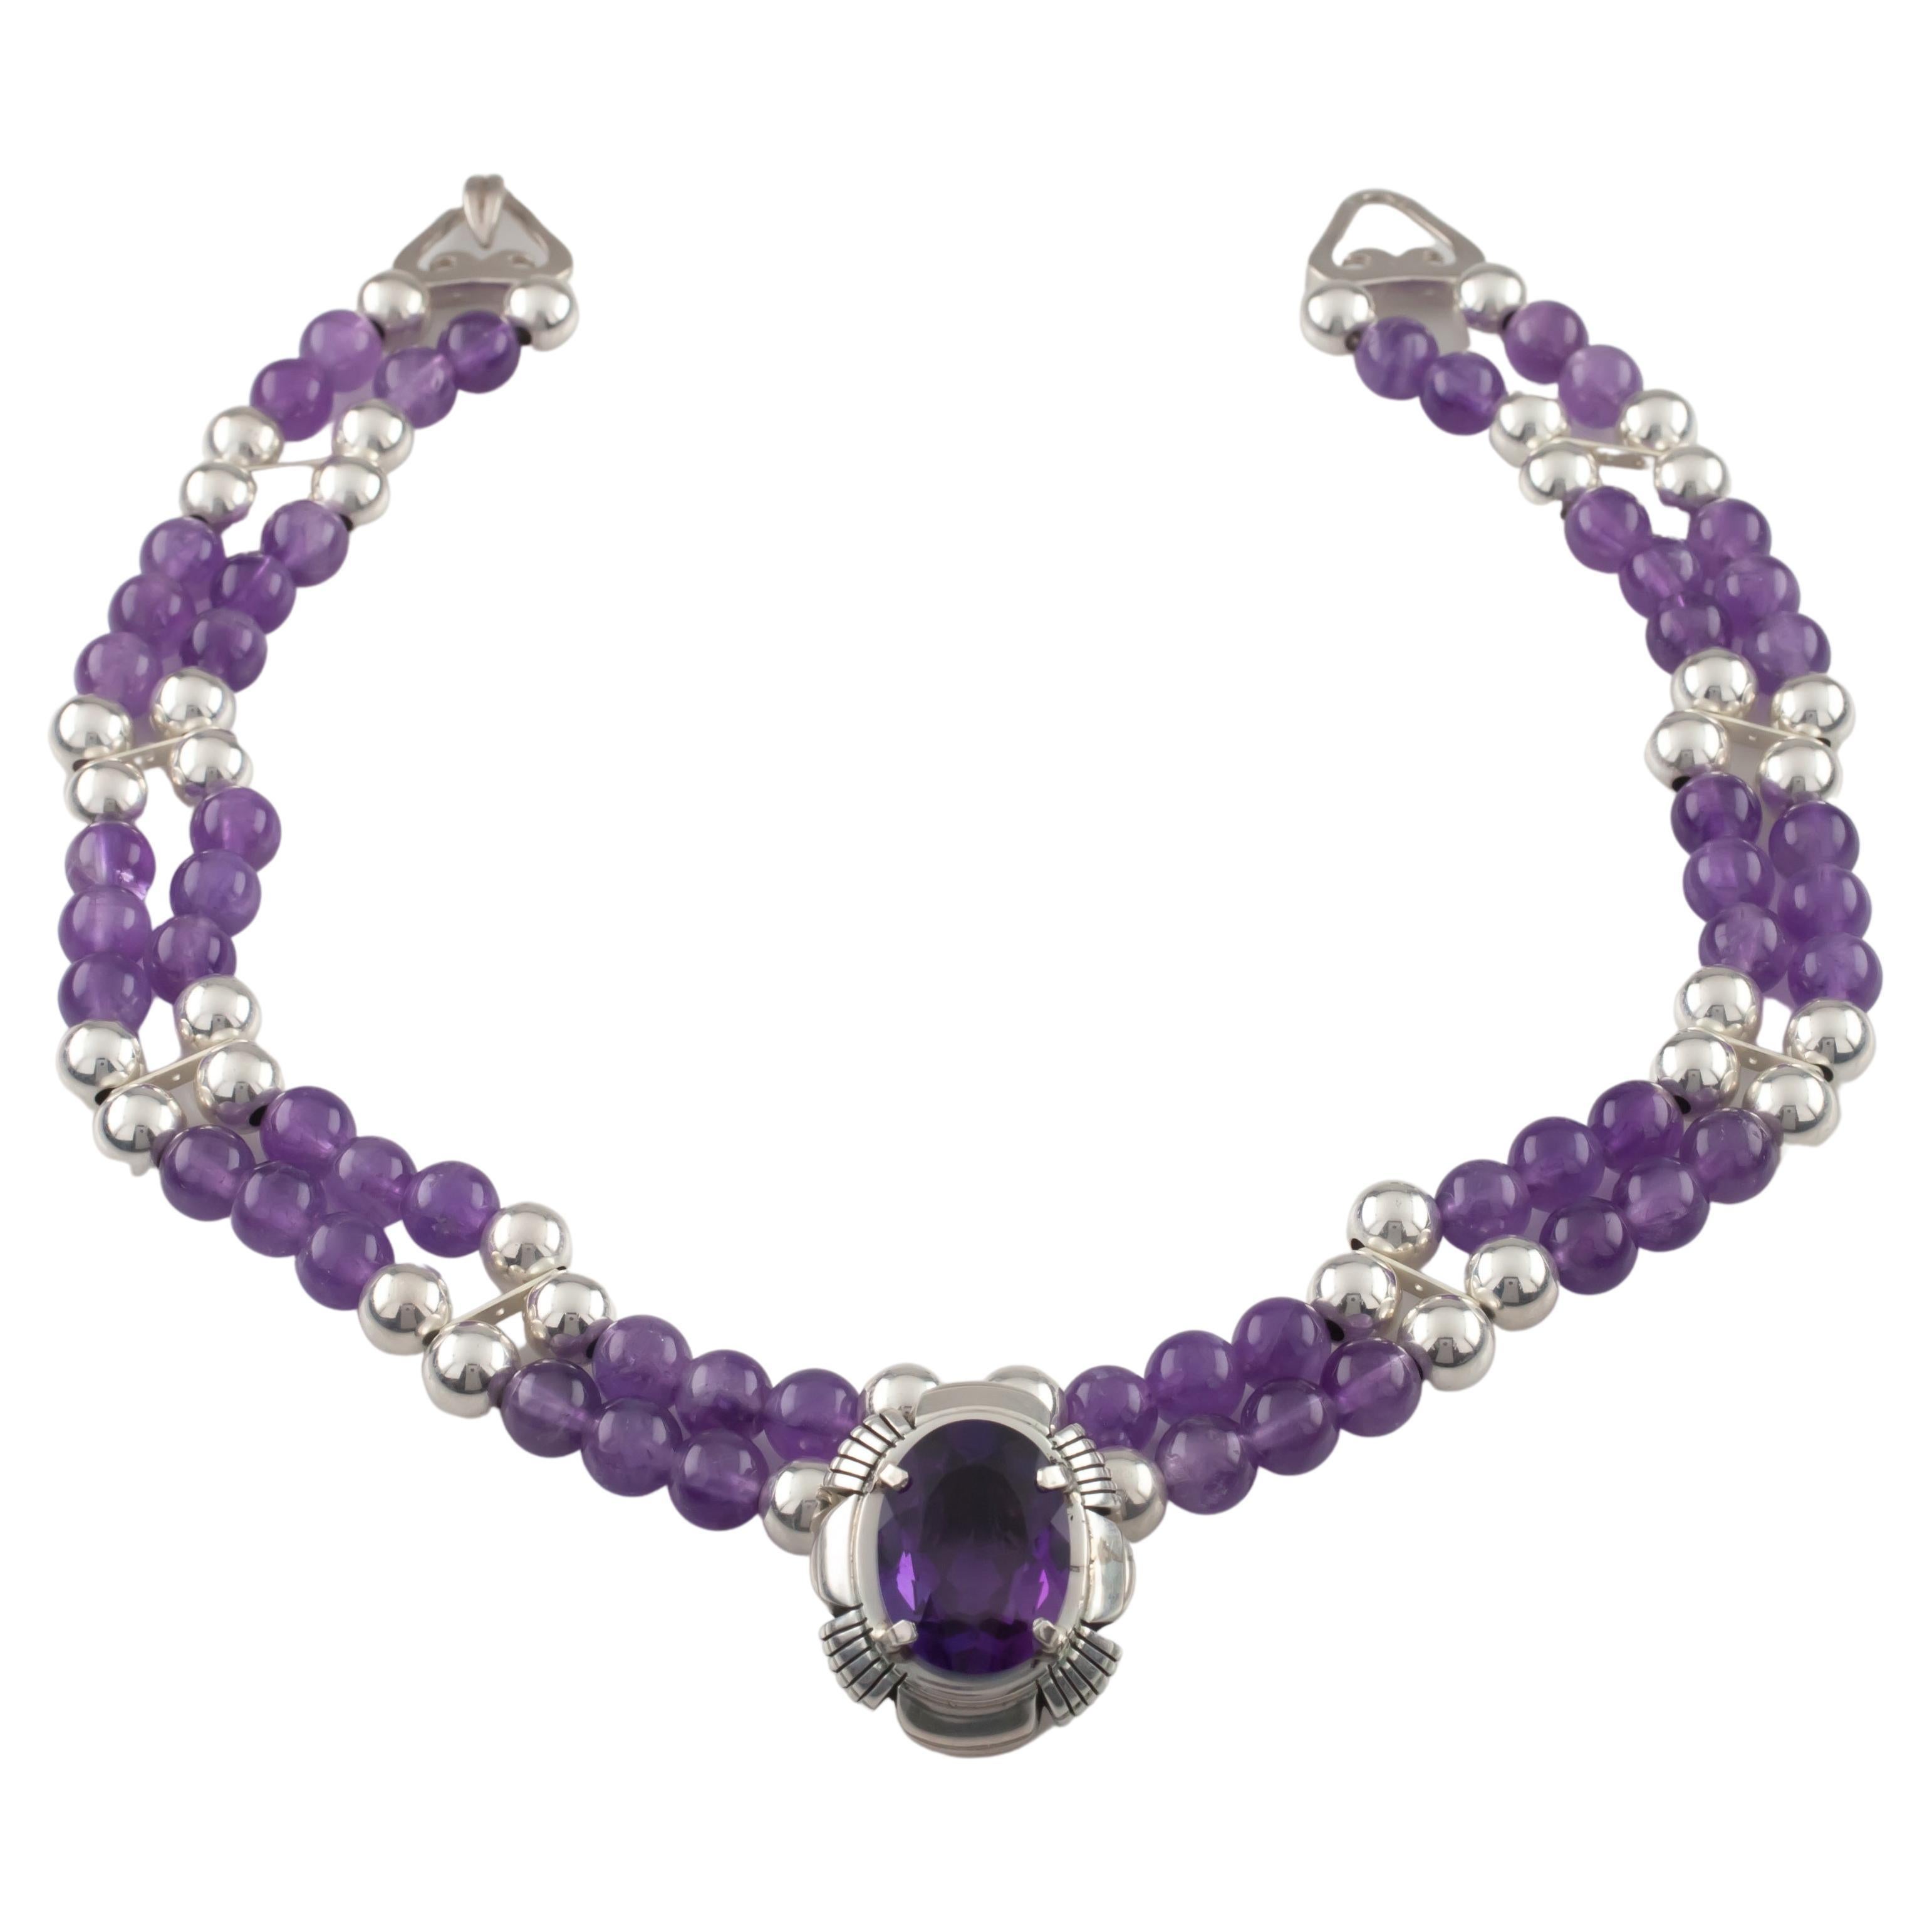 Carl Quintana Navajo Amethyst and Sterling Silver Necklace For Sale